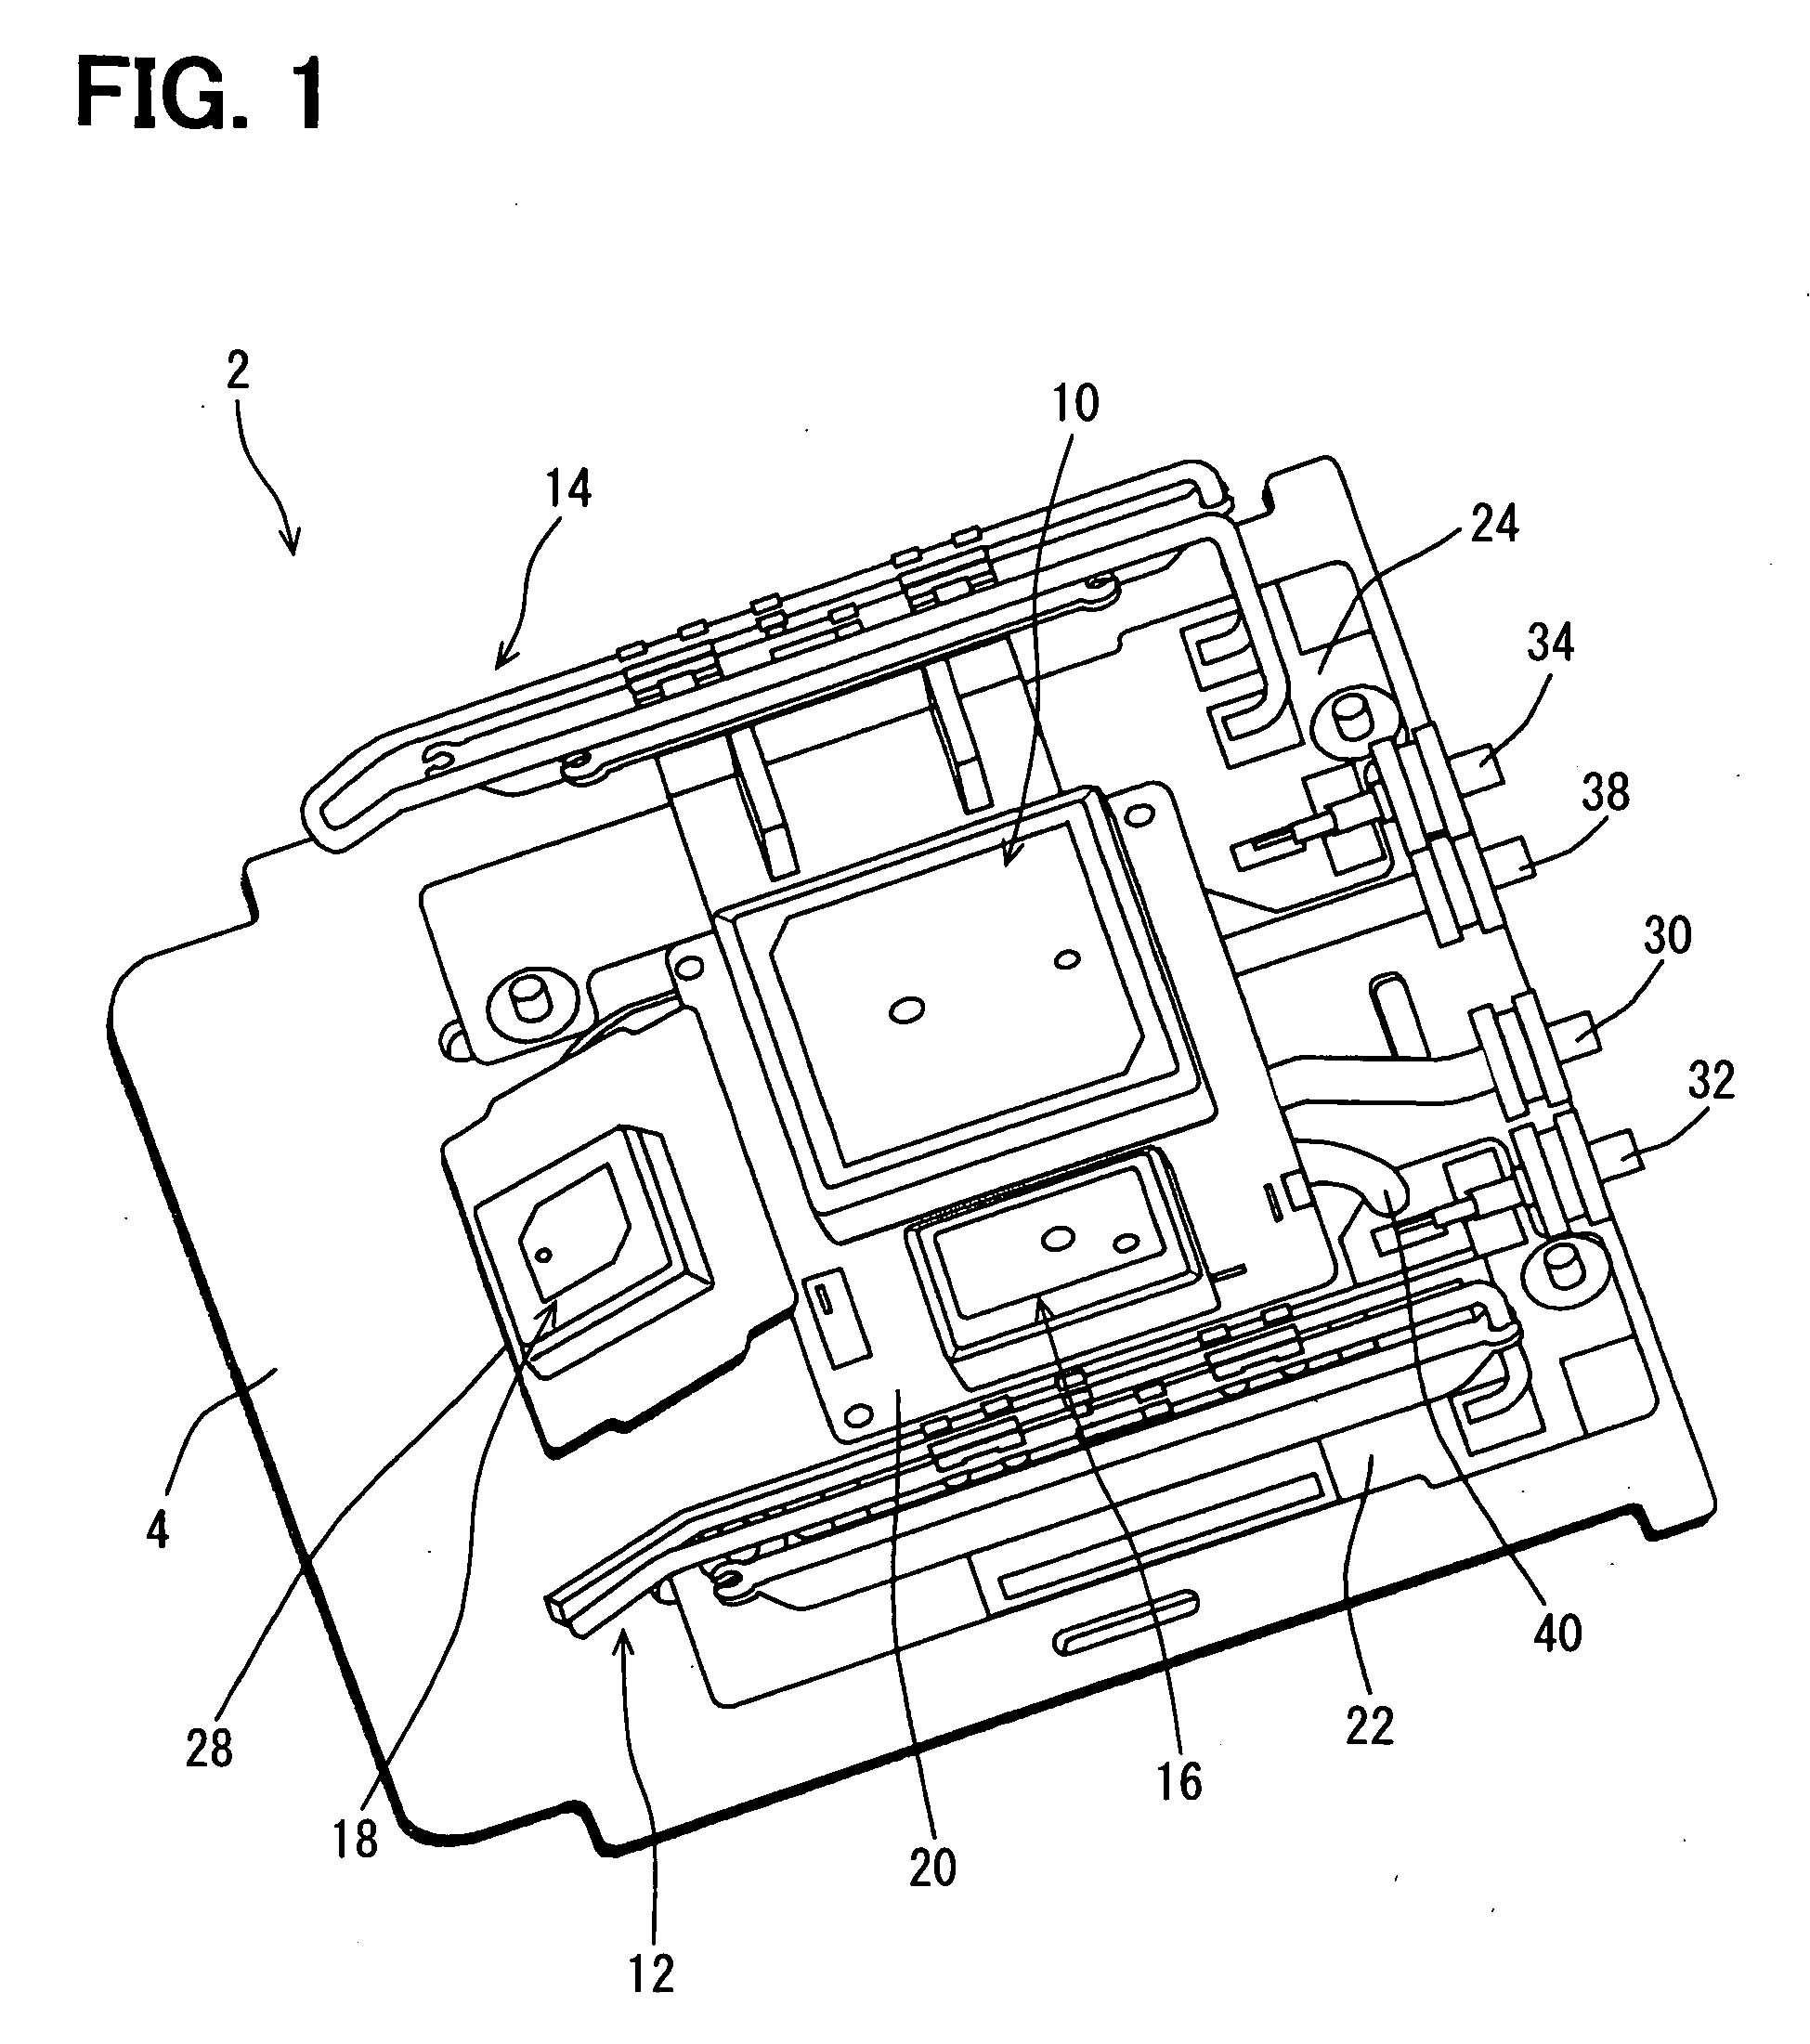 Antenna device for use in vehicle